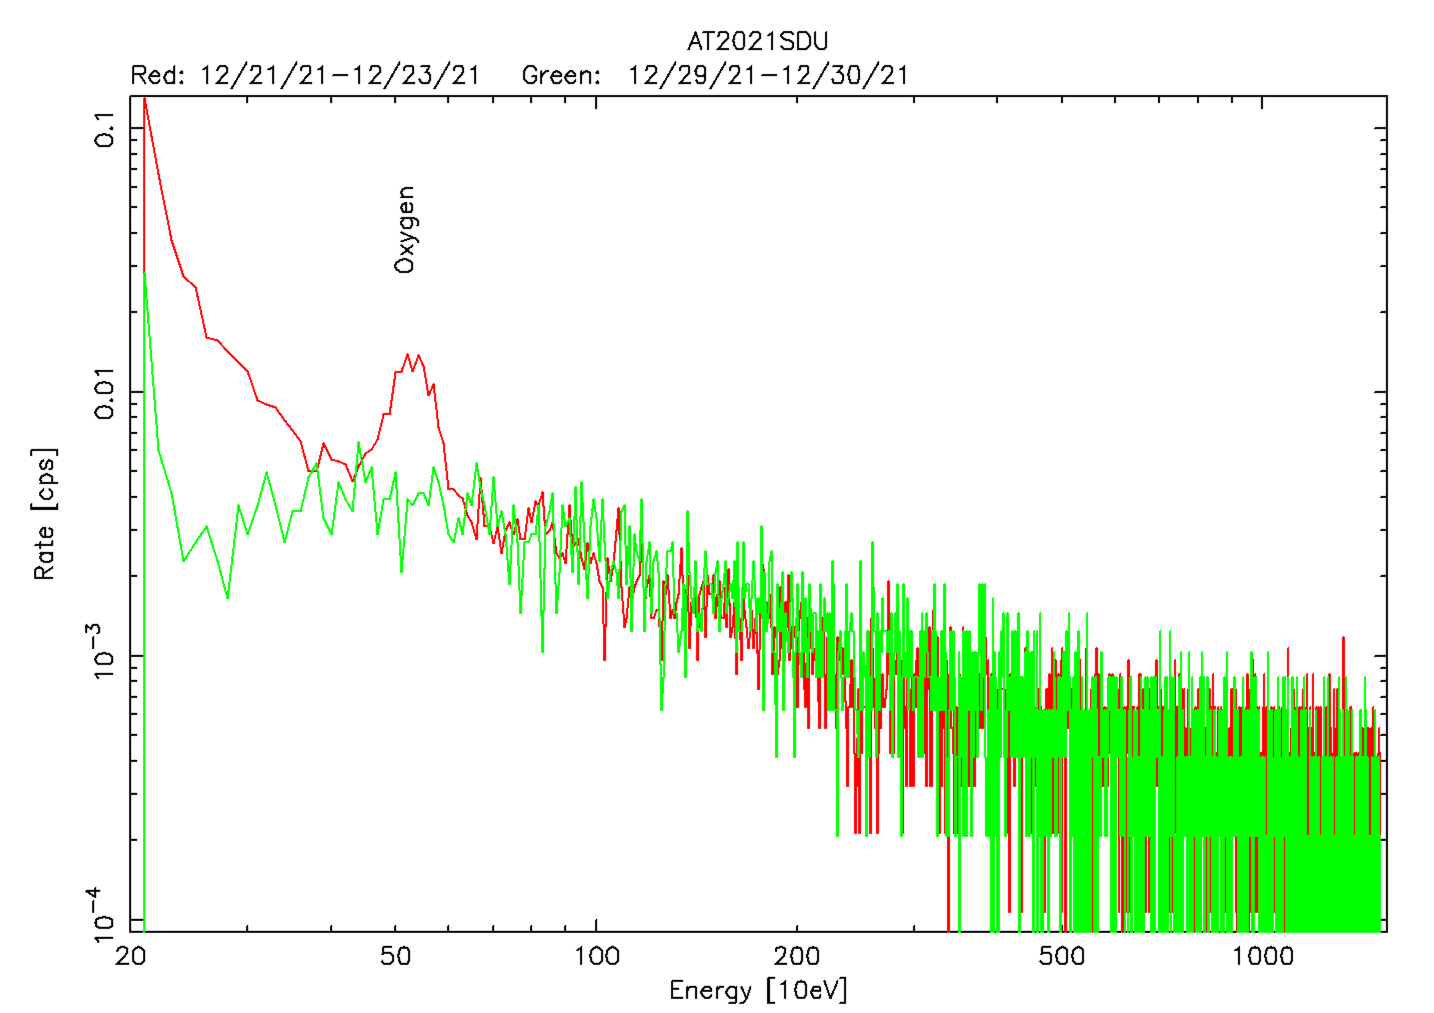 The NICER X-ray spectrum from observations of AT2021SDU taken during December 21-23, 2021 (red) and December 29-30, 2021 (green).  The earlier observation clearly shows a line consistent with neutral or nearly neutral oxygen.